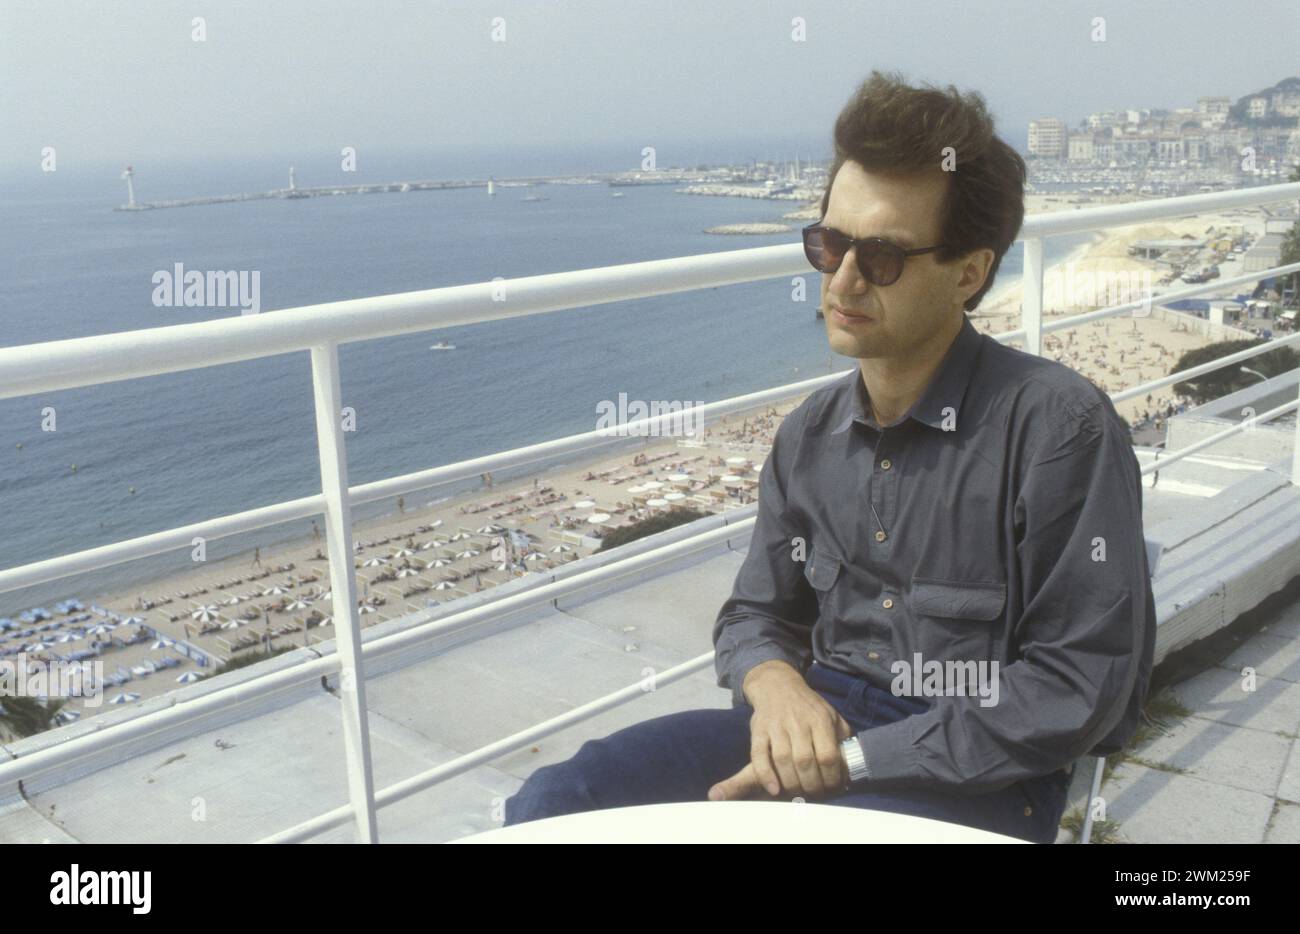 MME4780027 Cannes Film Festival 1980. German director Wim Wenders, at the festival out of competition with the movie “Lightning Over Water””, on the terrace of the old Cinema Palace/Festival del Cinema di Canes 1980. He registered Wim Wenders, the Festival fuori concorso con il film “” Lightning Over Water””, sulla terrazzzzo del vecchio palazzo del Cinema -; (add.info.: Cannes Film Festival 1980. German director Wim Wenders, at the festival out of competition with the movie “Lightning Over Water””, on the terrace of the old Cinema Palace/Festival del Cinema di Canes 1980. He registered Wim We Stock Photo